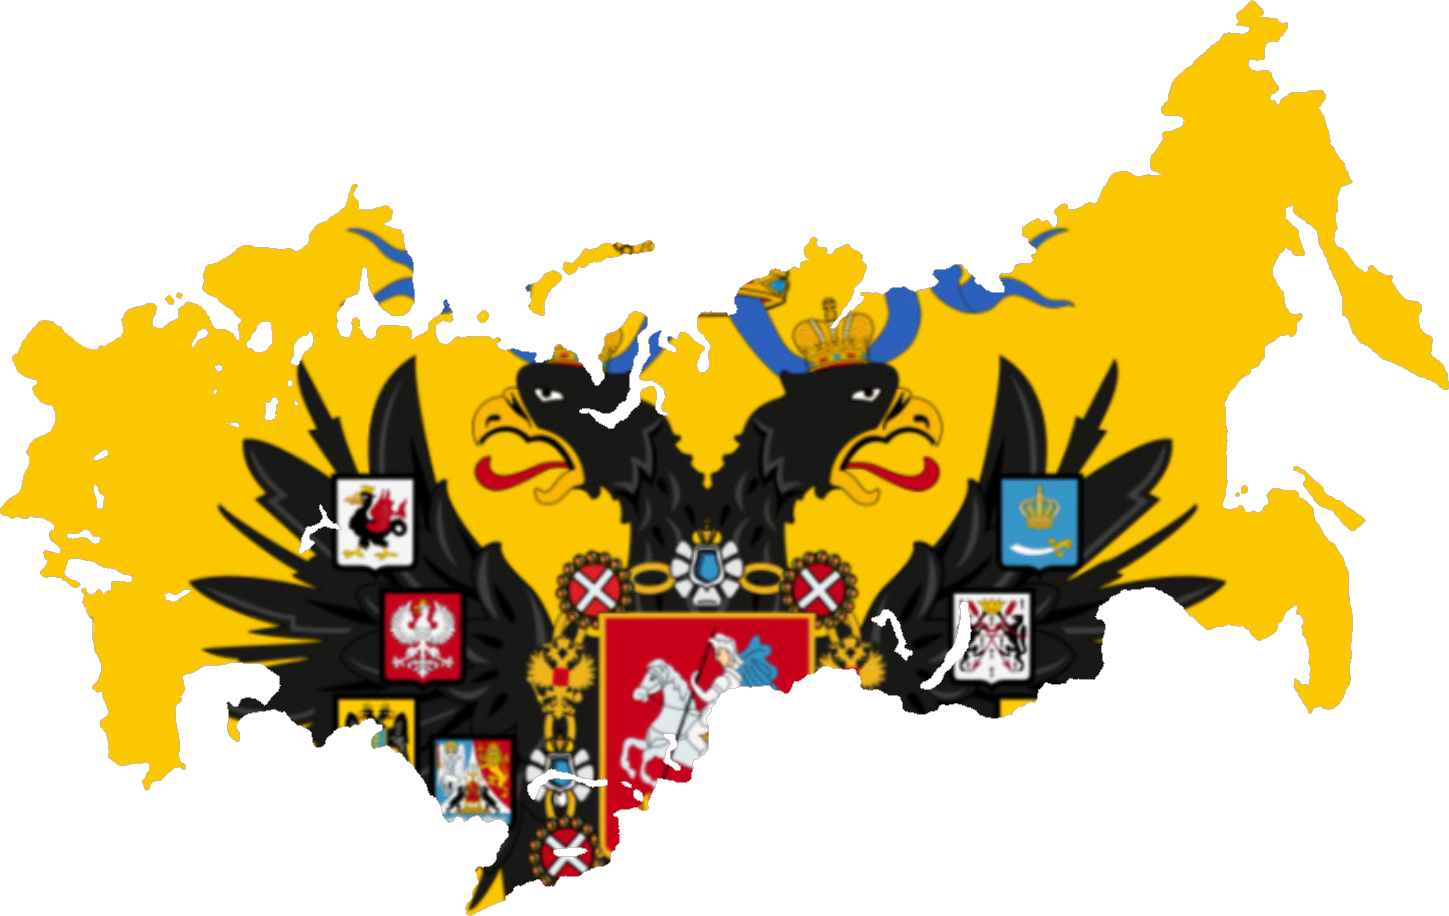 Flag-map of Tsardom Of Russia by nguyenpeachiew on DeviantArt